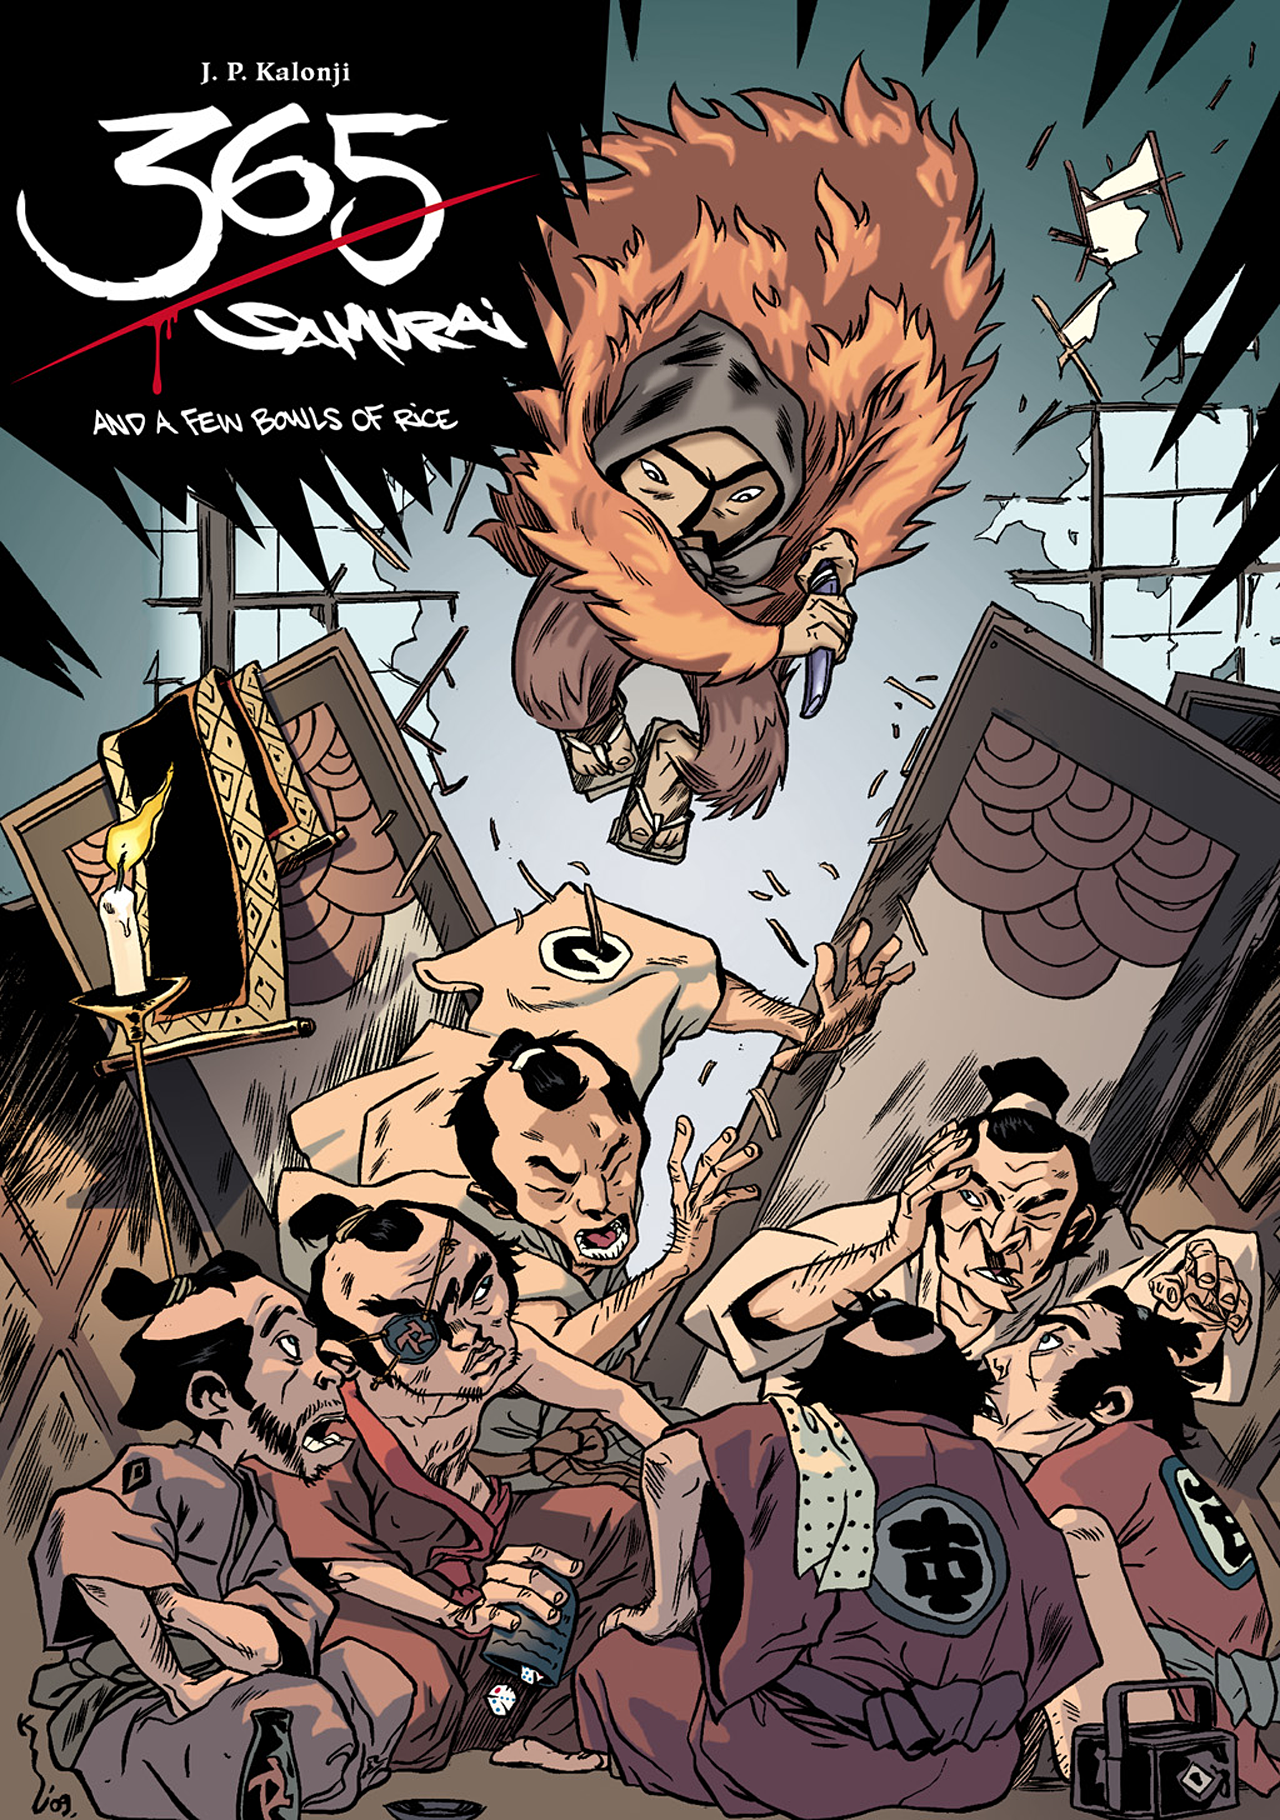 Read online 365 Samurai and a Few Bowls of Rice comic -  Issue # TPB (Part 1) - 1